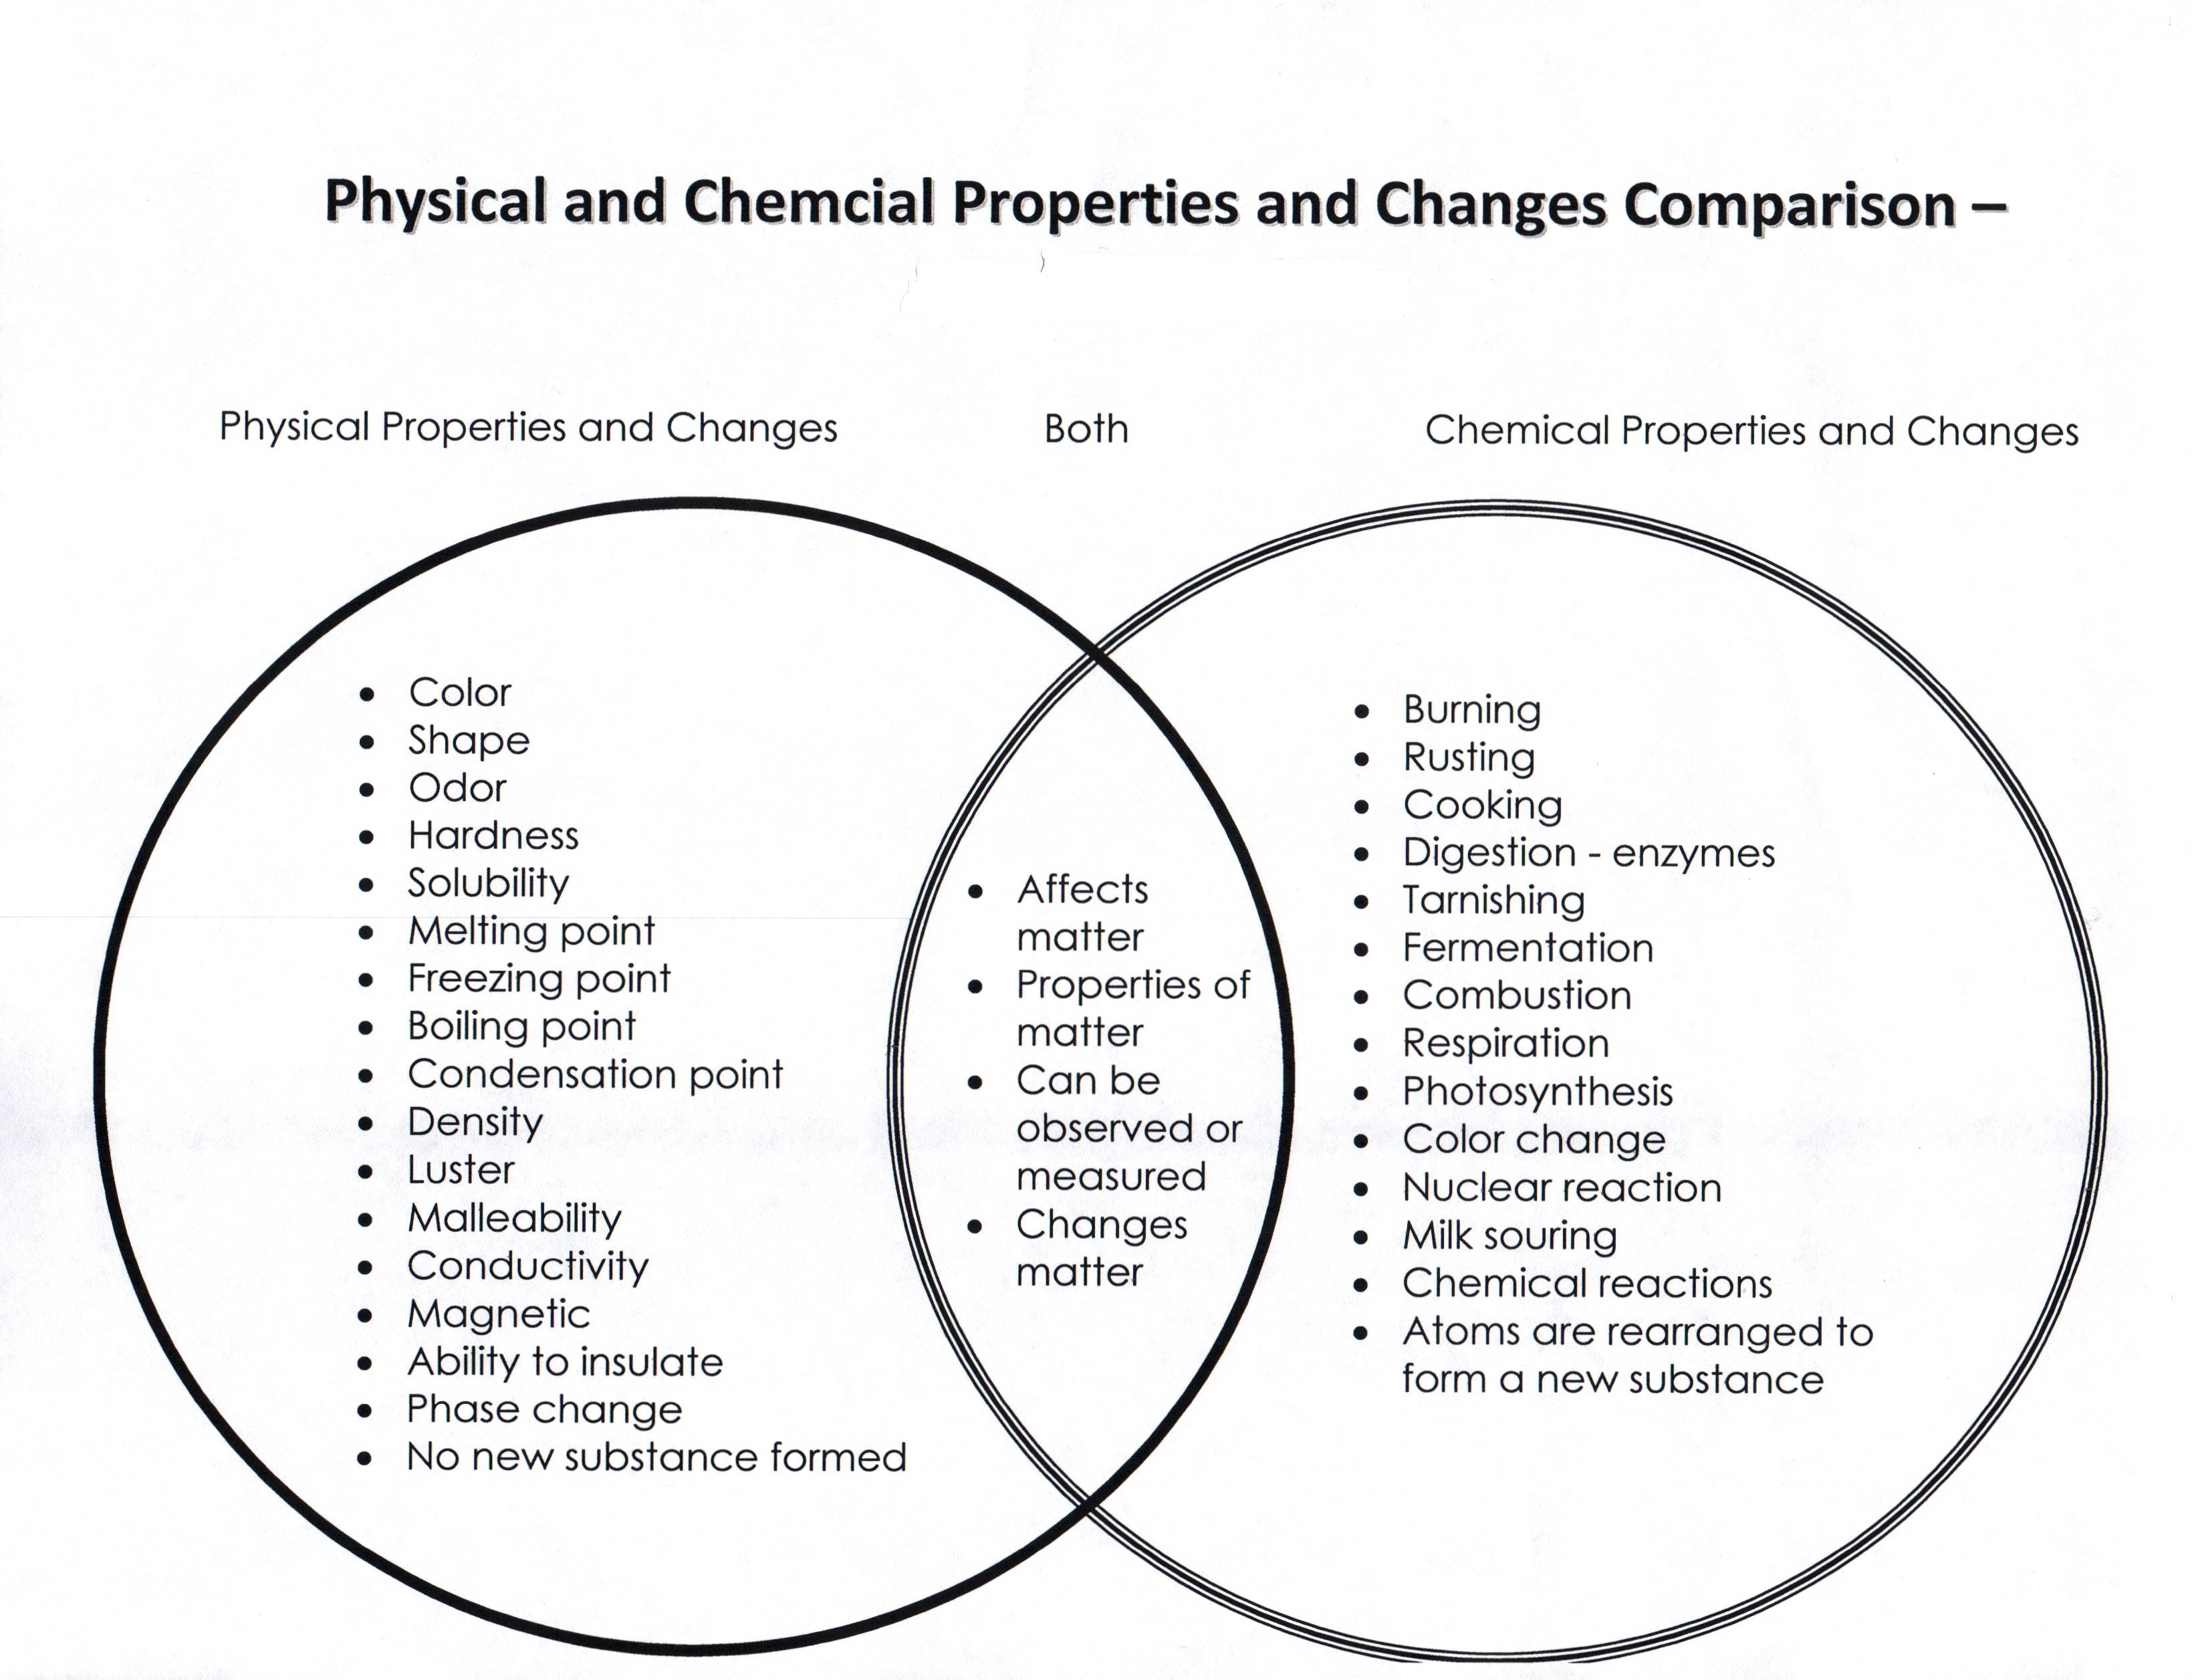 Physical and Chemical Properties and Changes Comparison-2.jpg